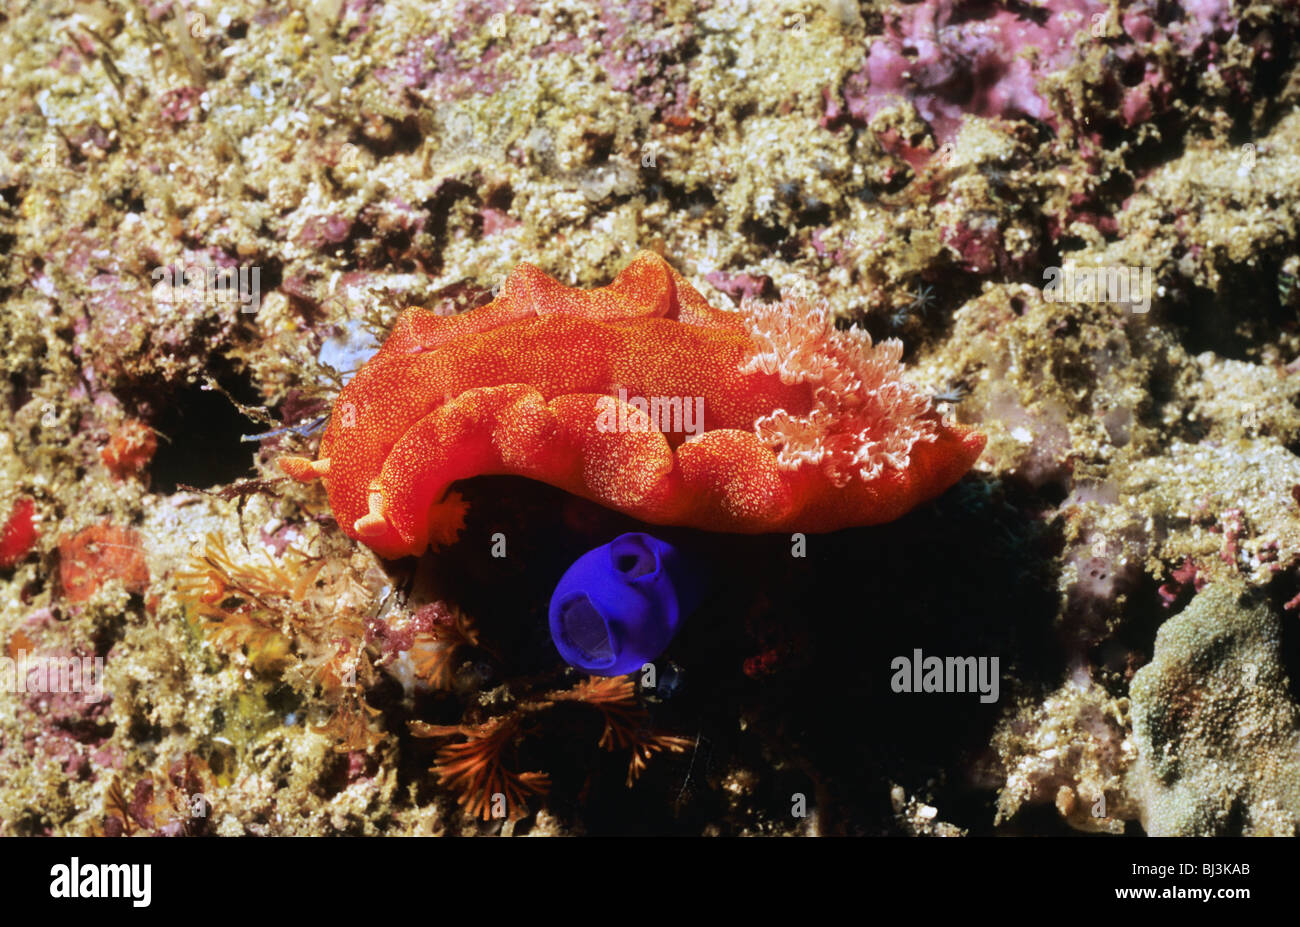 Spanish Dancer Nudibranch and Blue Sea Squirt, underwater in the Flores Sea. Komodo National Park. Underwater photography. Stock Photo